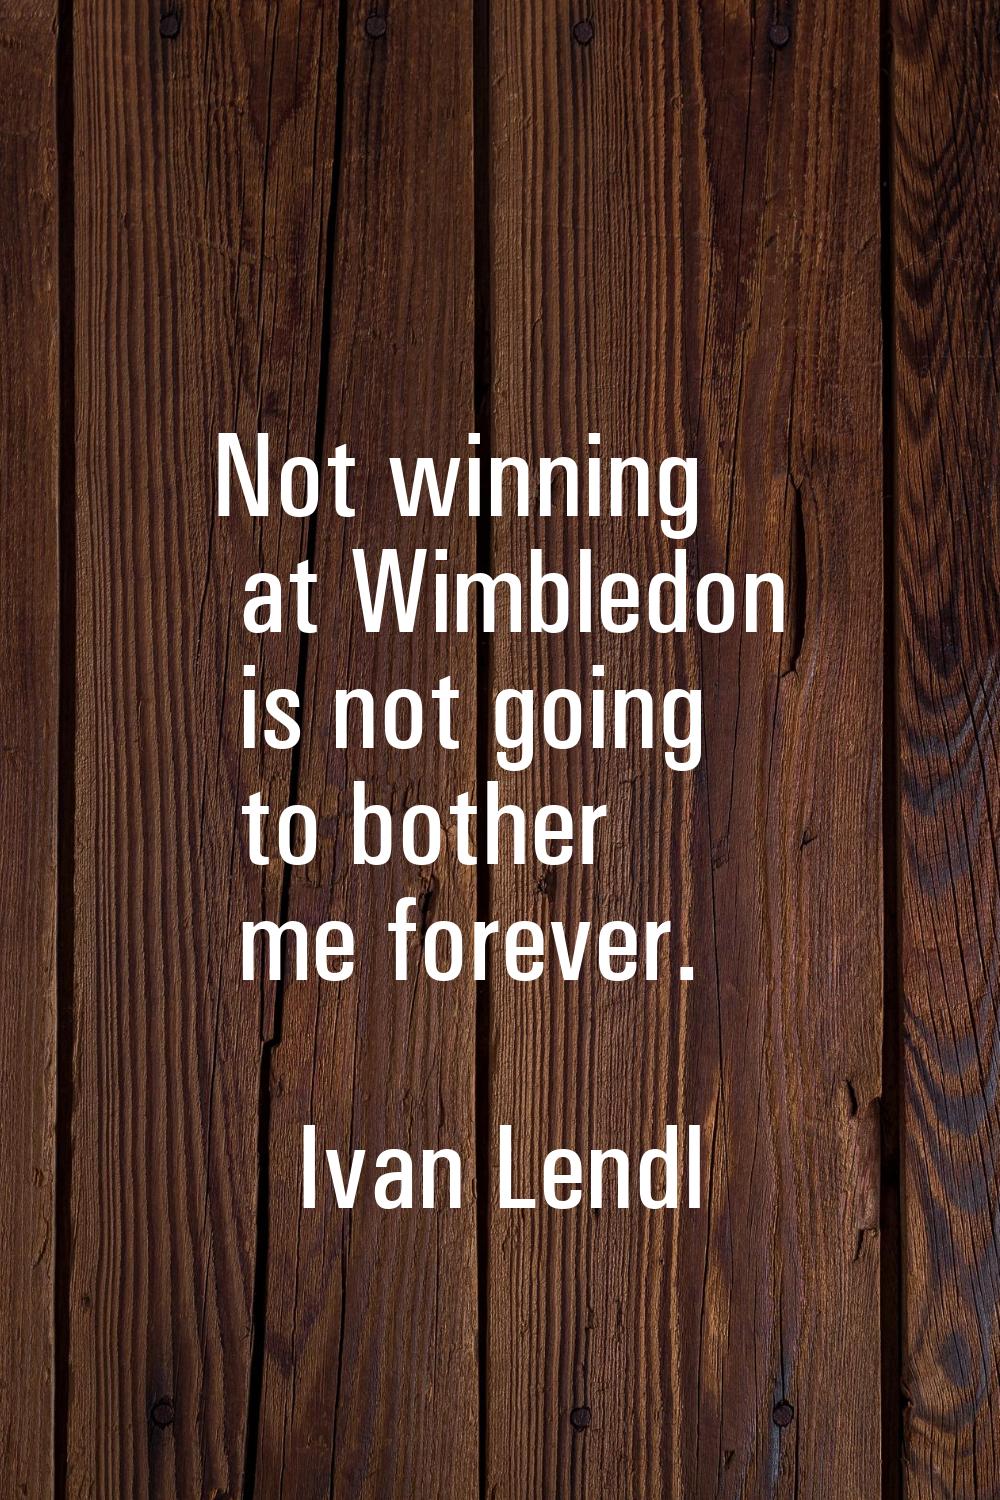 Not winning at Wimbledon is not going to bother me forever.